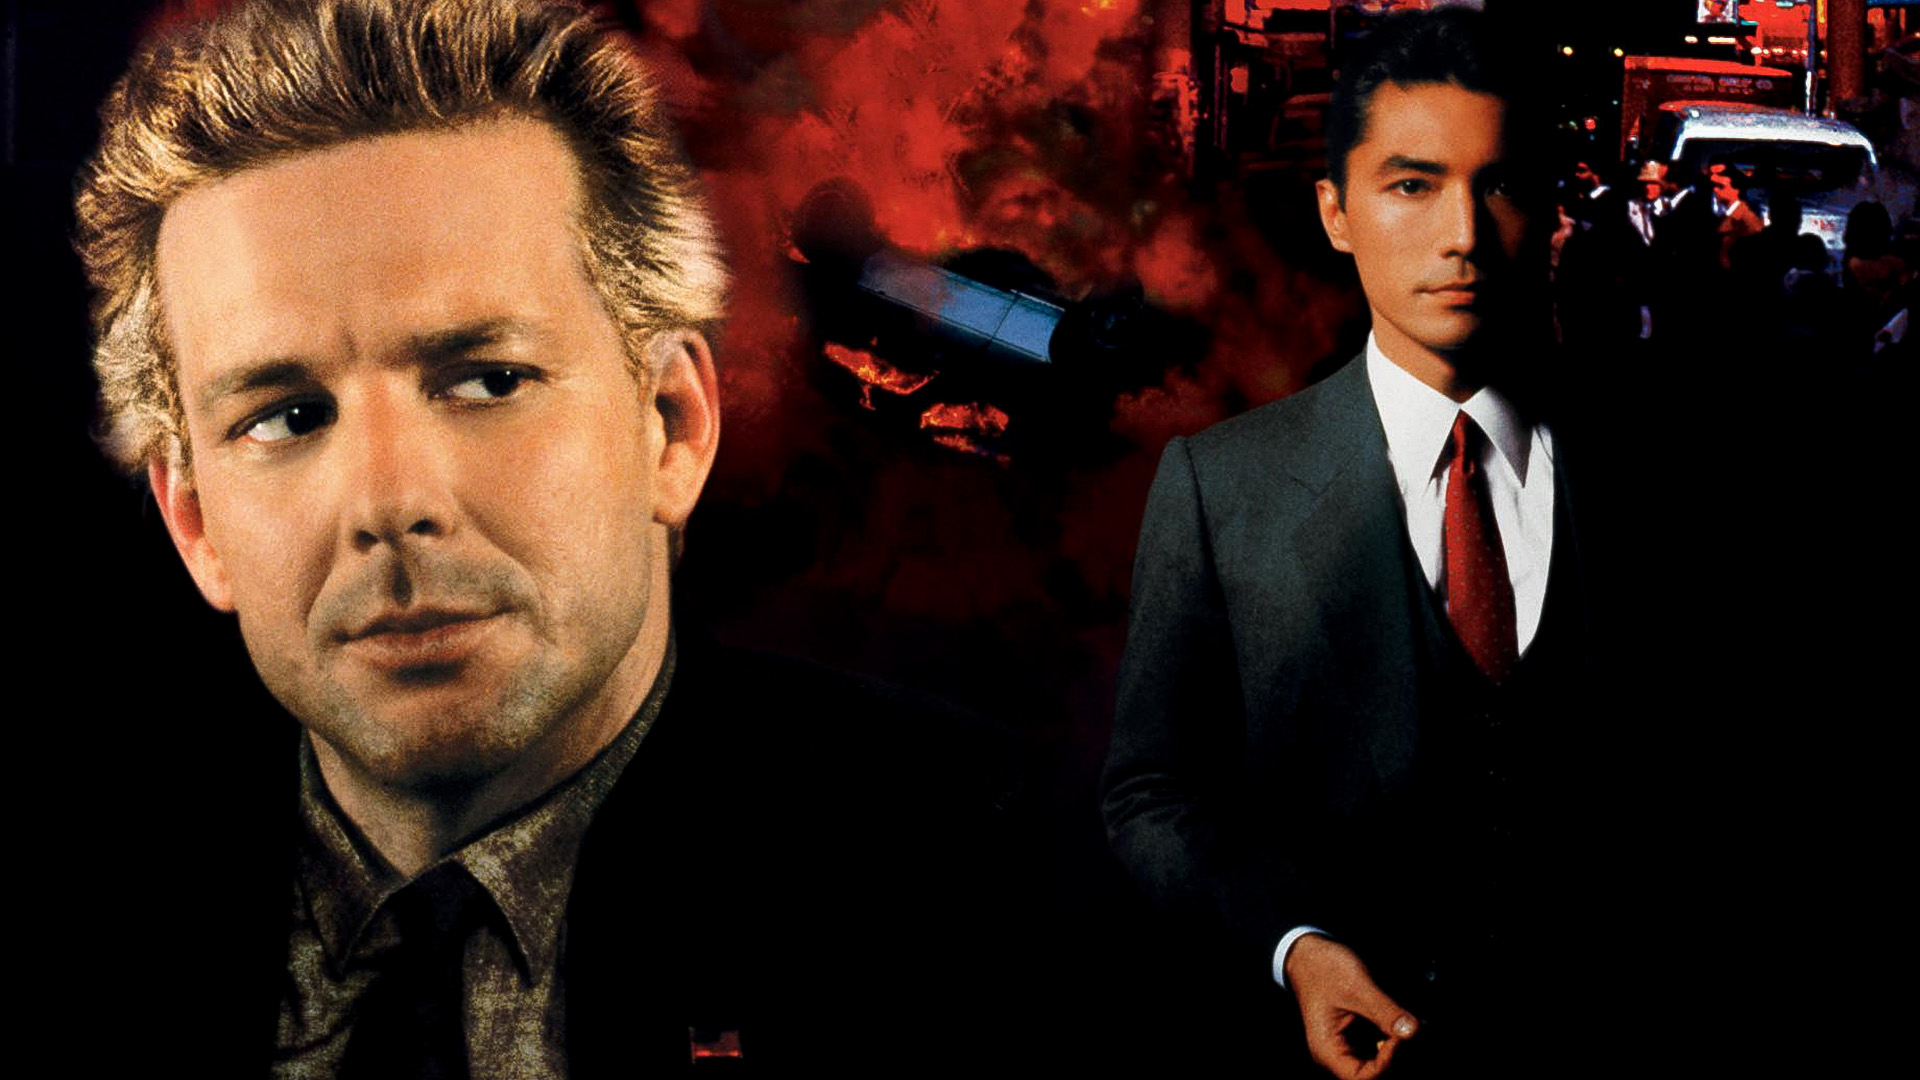 Full HD movie, year of the dragon, mickey rourke